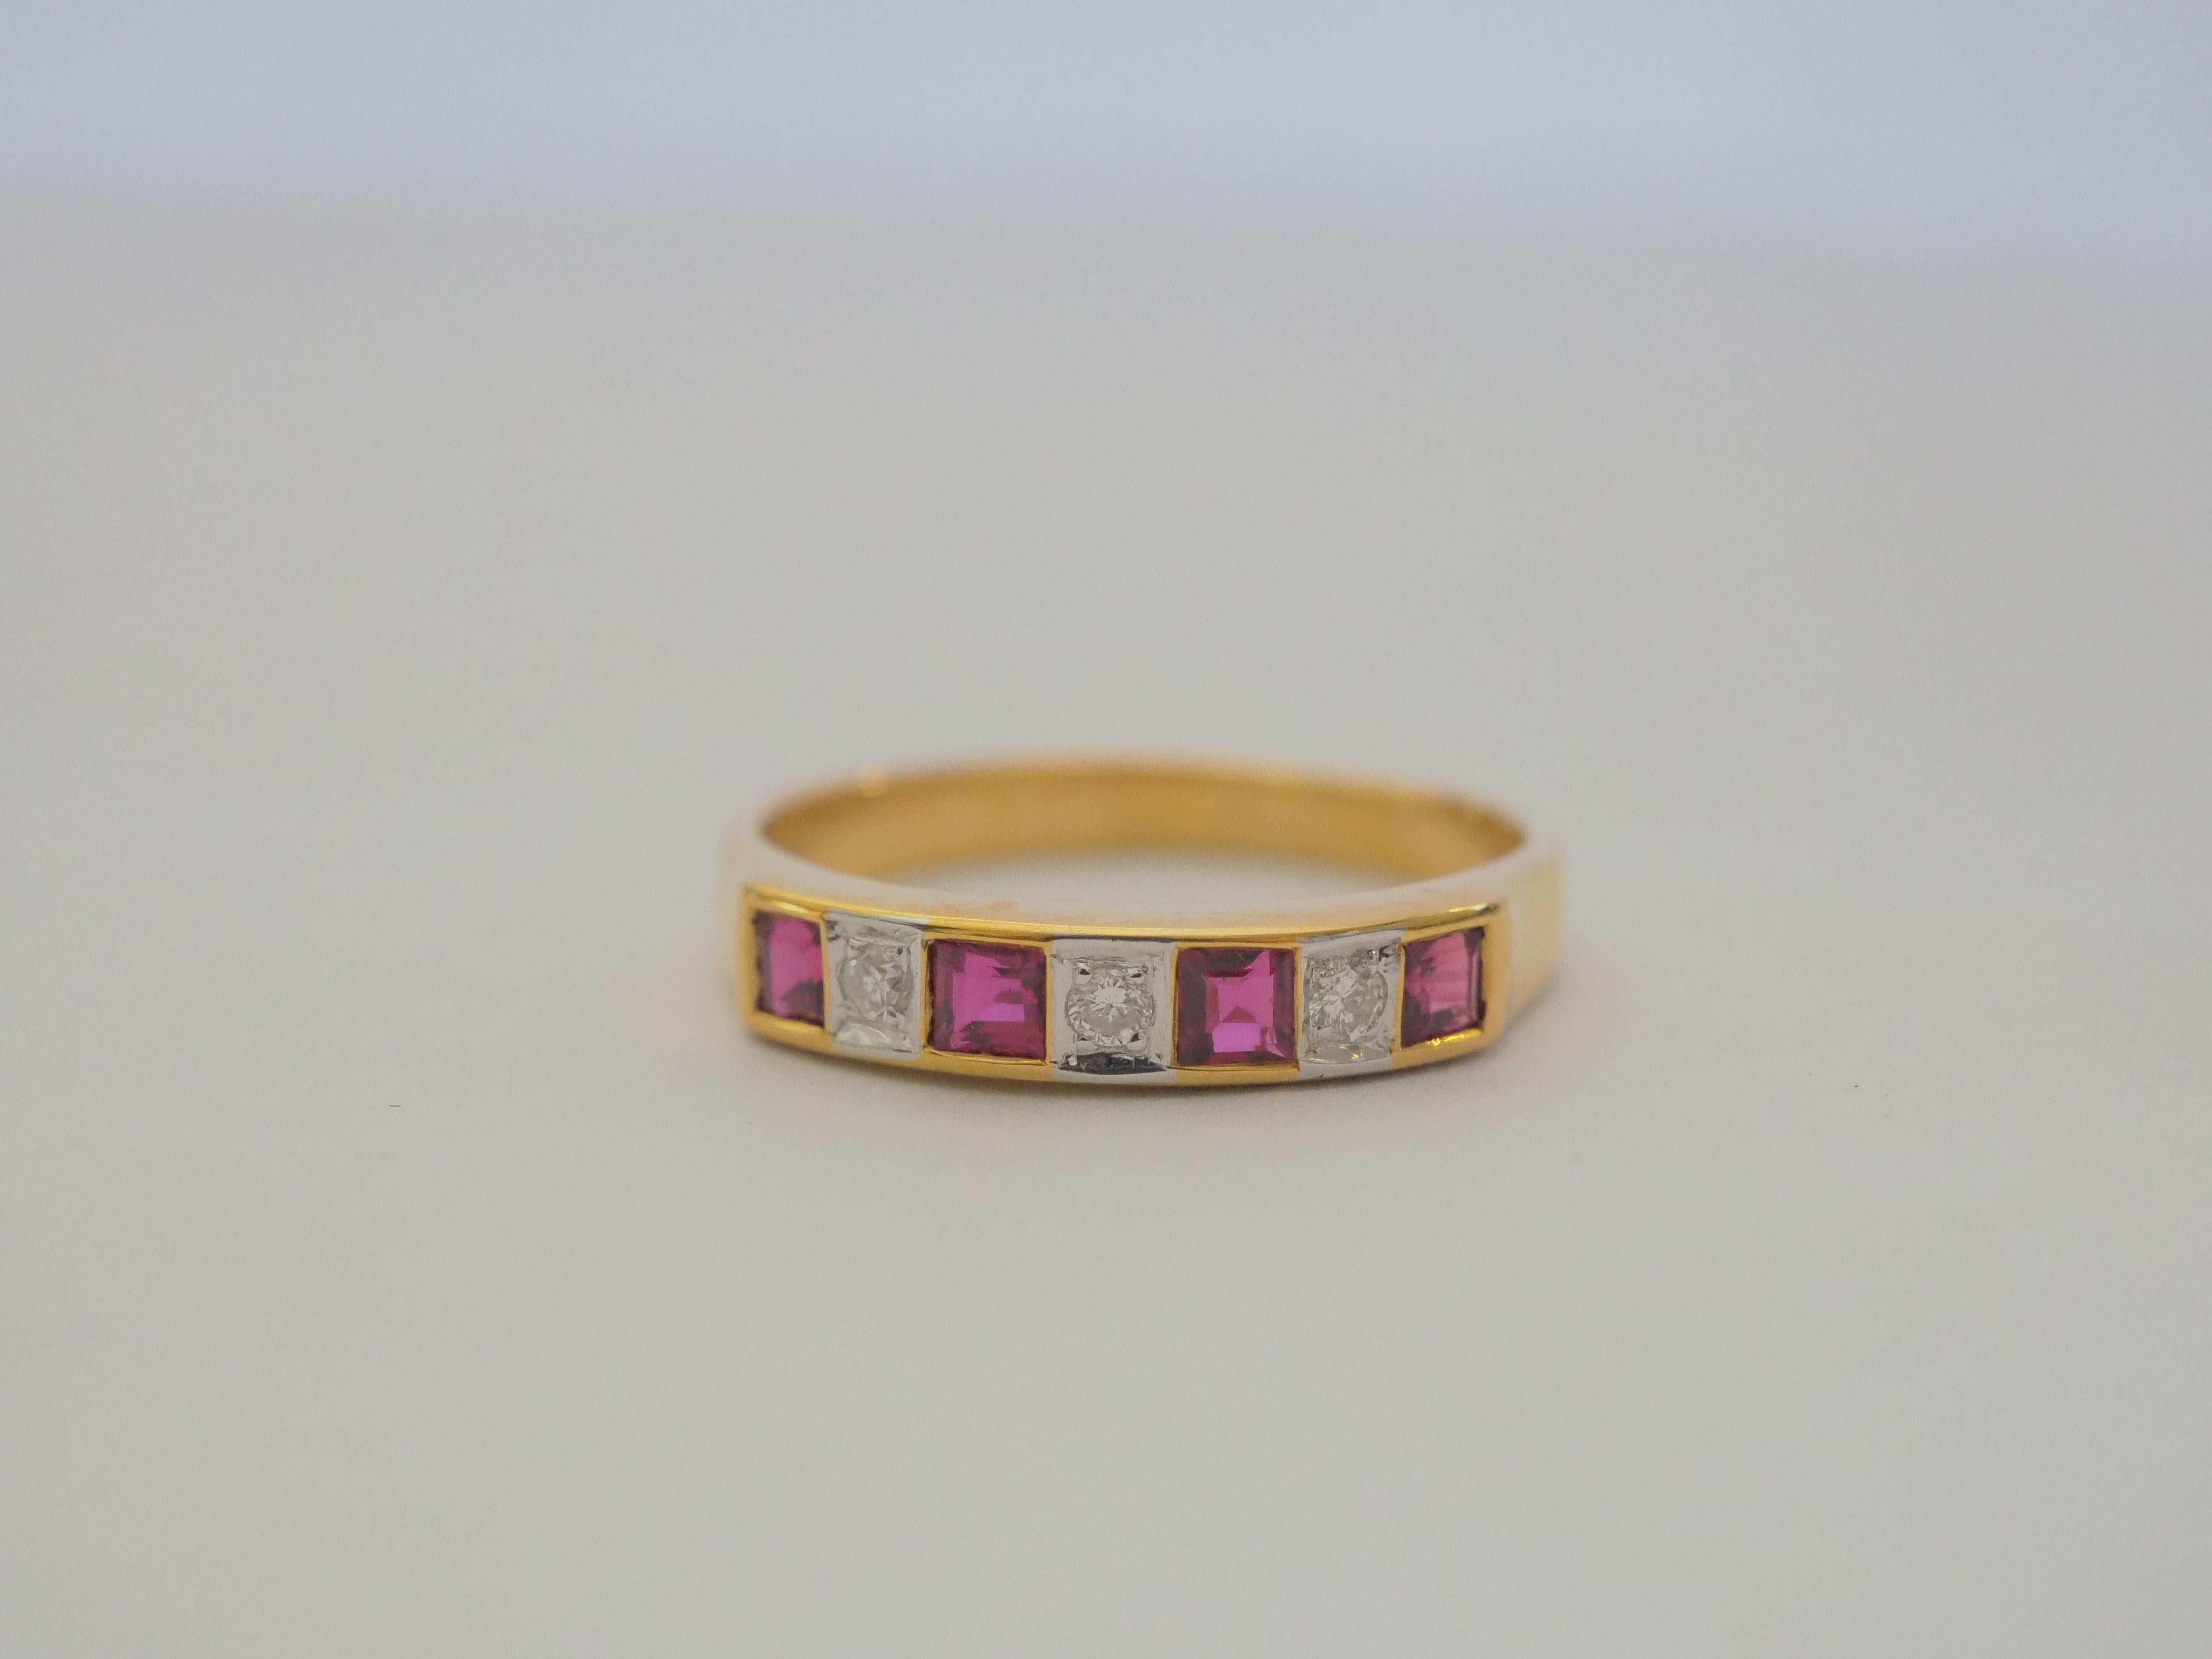 A gorgeous luxury Neo-vintage squared band ring that is both suitable for all sexes. This ring has one row of beautiful Thai rubies and brilliant cut diamonds channeled nicely into the band. The square cut rubies have a beautiful pinkish red hue and